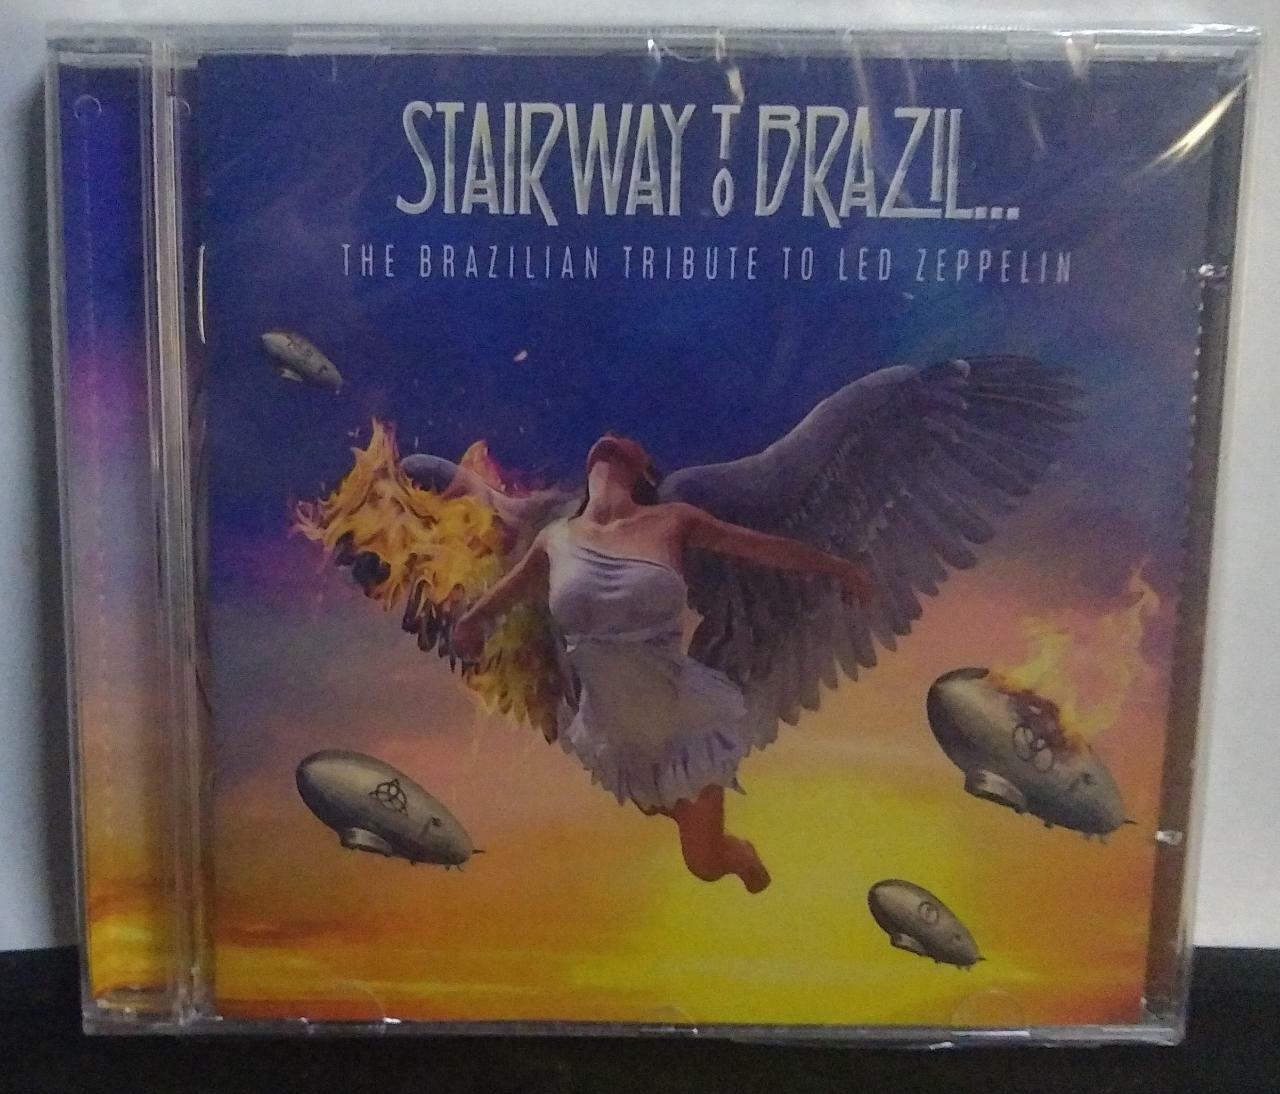 CD - Stairway to Brazil - the Brazilian Tribute to Led Zeppelin